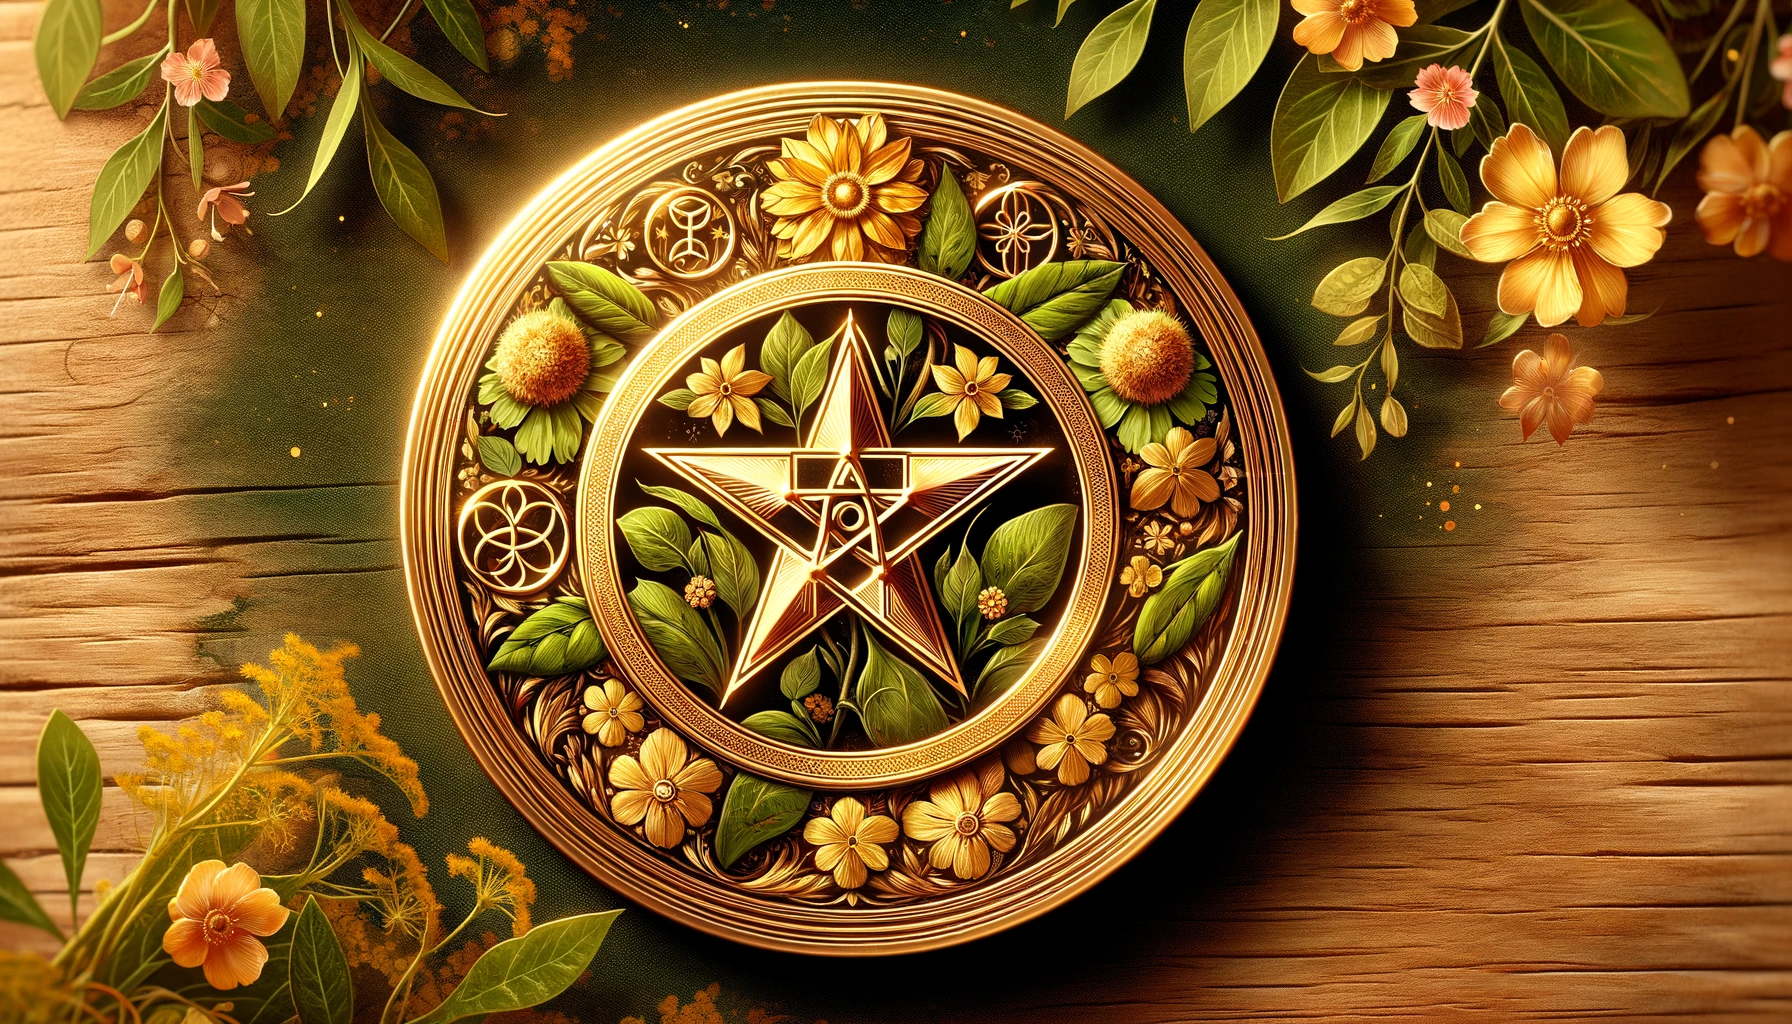 a 169 image that vividly showcases a golden pentacle the central symbol of the Ace of Pentacles tarot card The pentacle should be adorned with lush green leaves and an array of